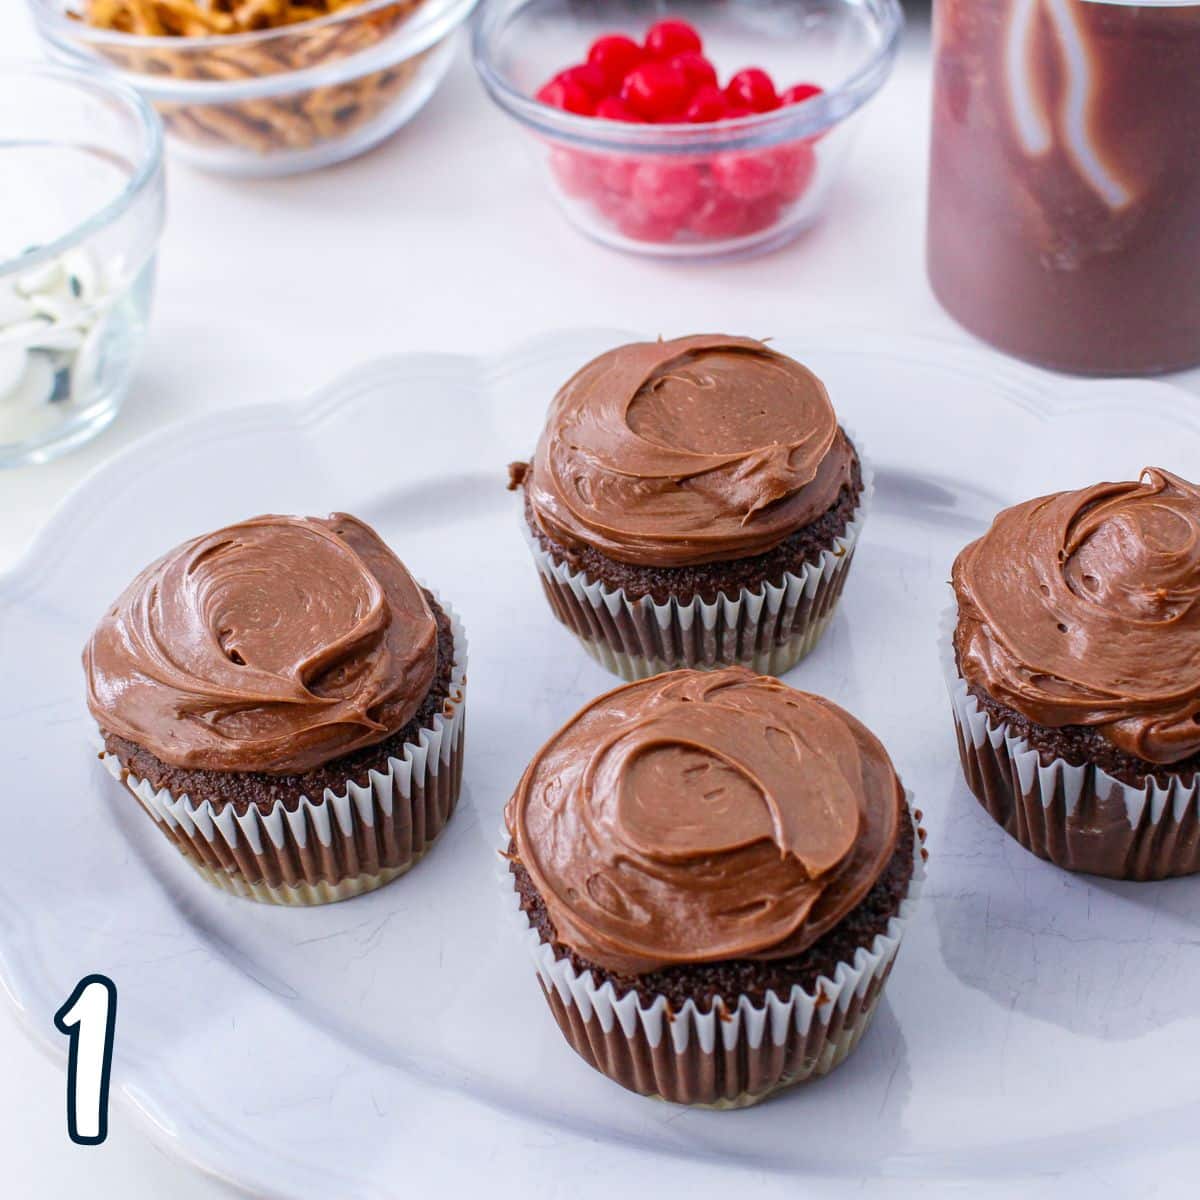 Chocolate cupcakes with chocolate frosting on a plate.